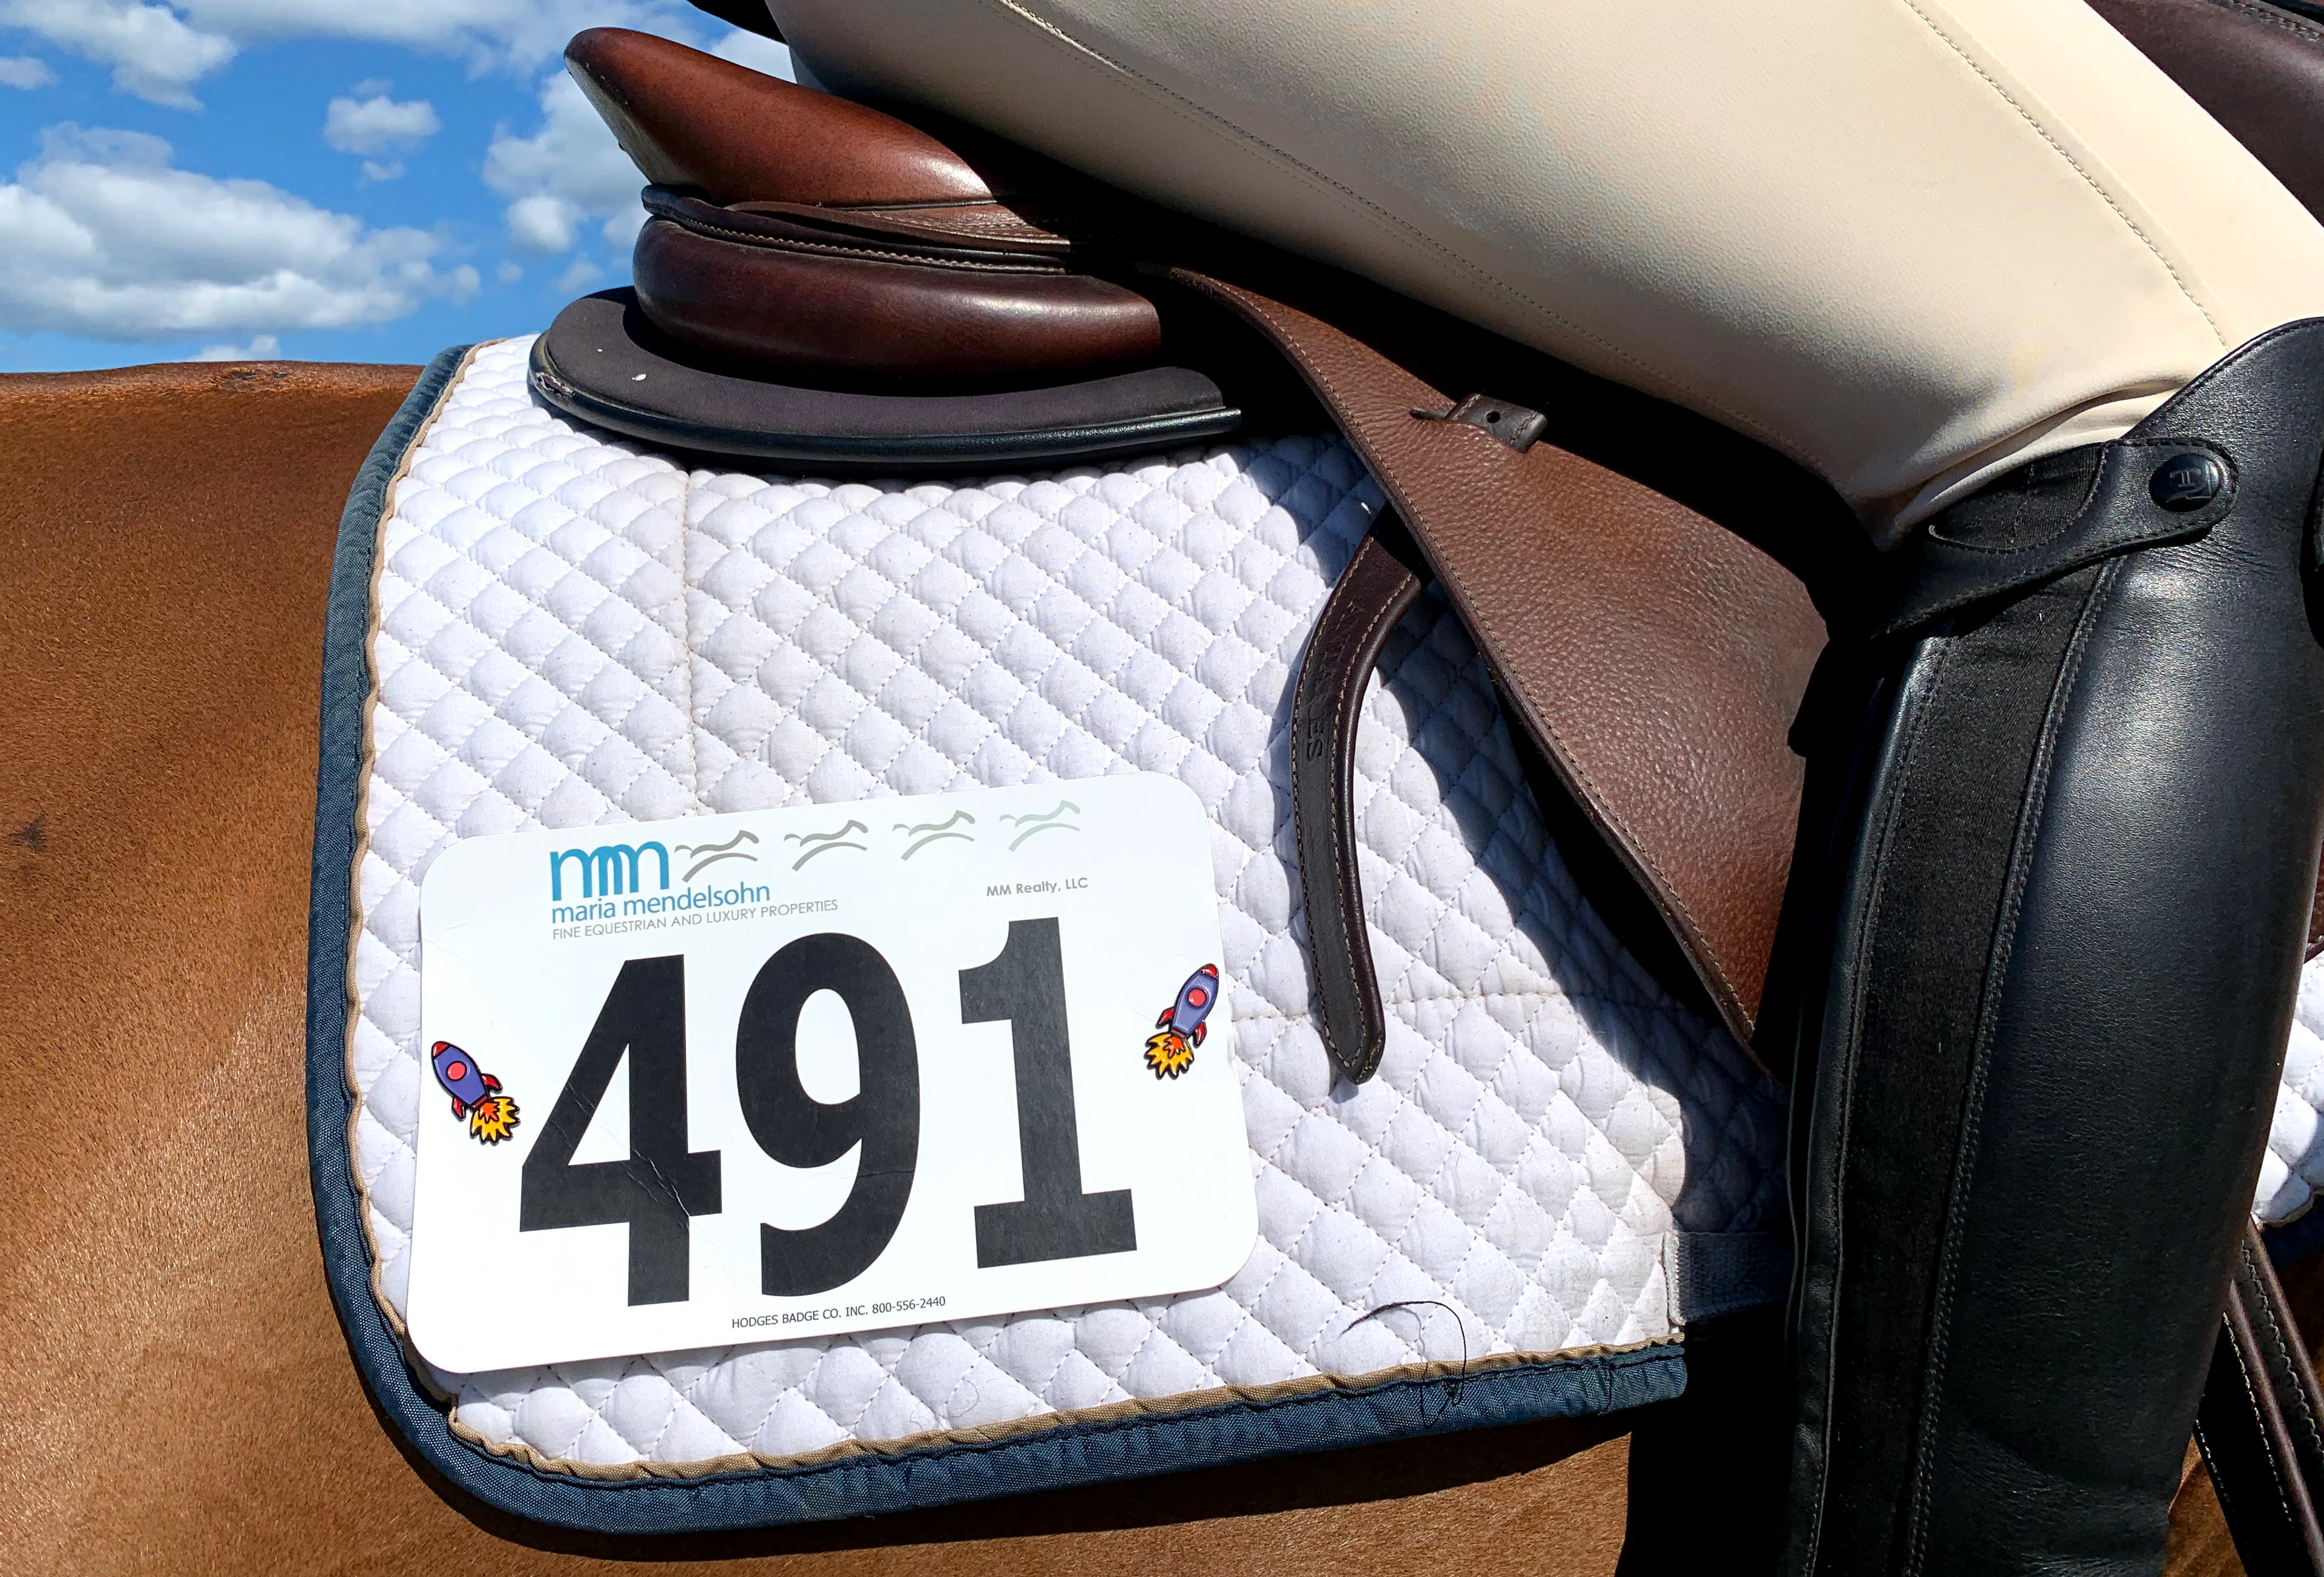 pinsnickety rocket ship horse show number pins on a saddle pad with a rider